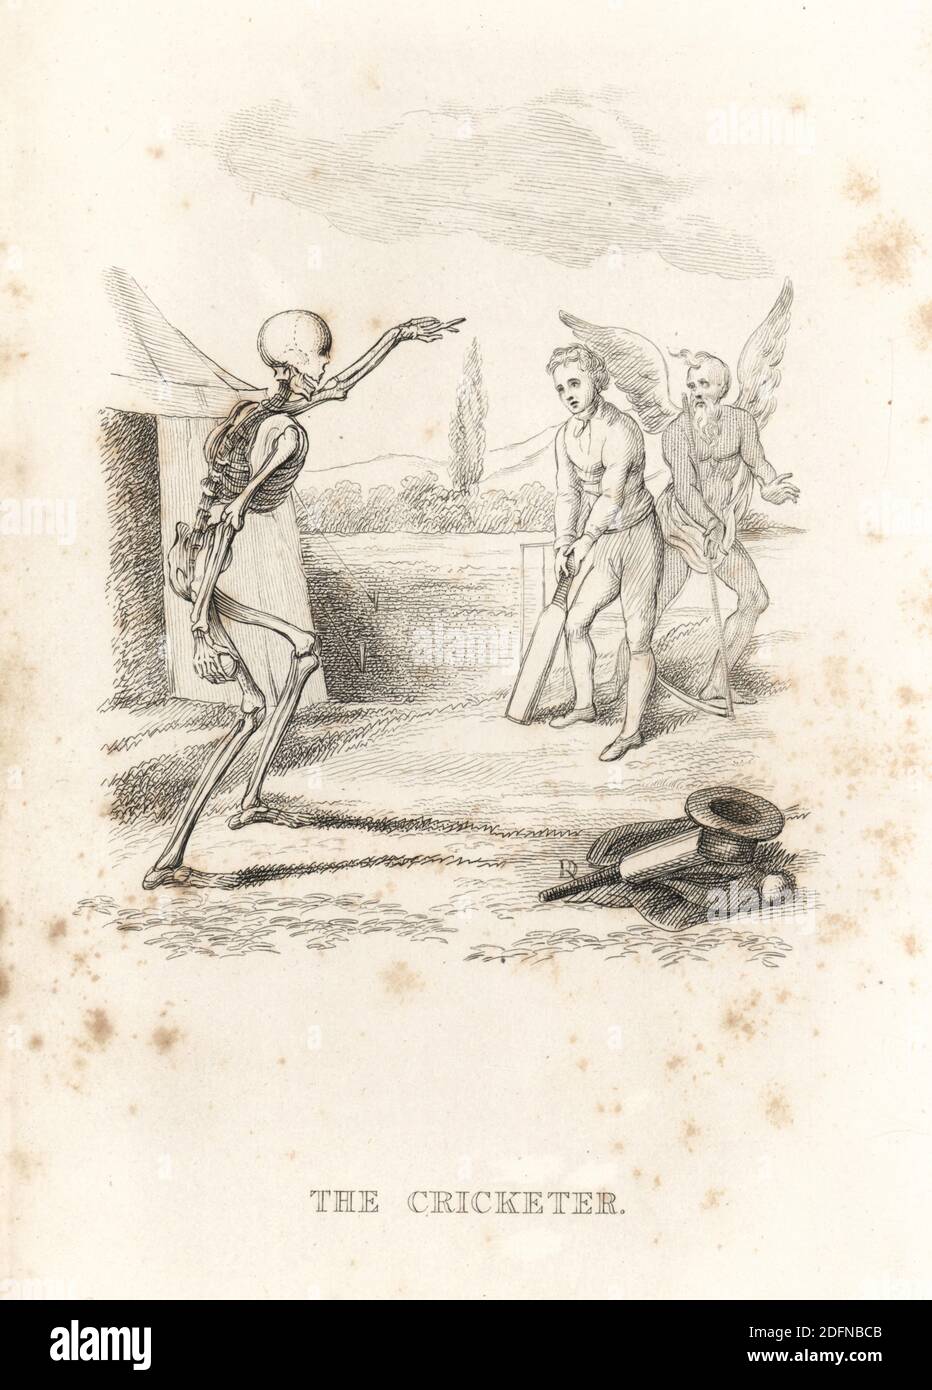 The skeleton of Death bowls a ball at a cricketer at bat. The wicket keeper is Father Time with his scythe. A top hat, coat, cricket bat and ball lie on the ground. Illustration drawn and engraved on steel by Richard Dagley from his own Death’s Doings, Consisting of Numerous Original Compositions in Verse and Prose, J. Andrews, London, 1827. Dagley (1761-1841) was an English painter, illustrator and engraver. Stock Photo